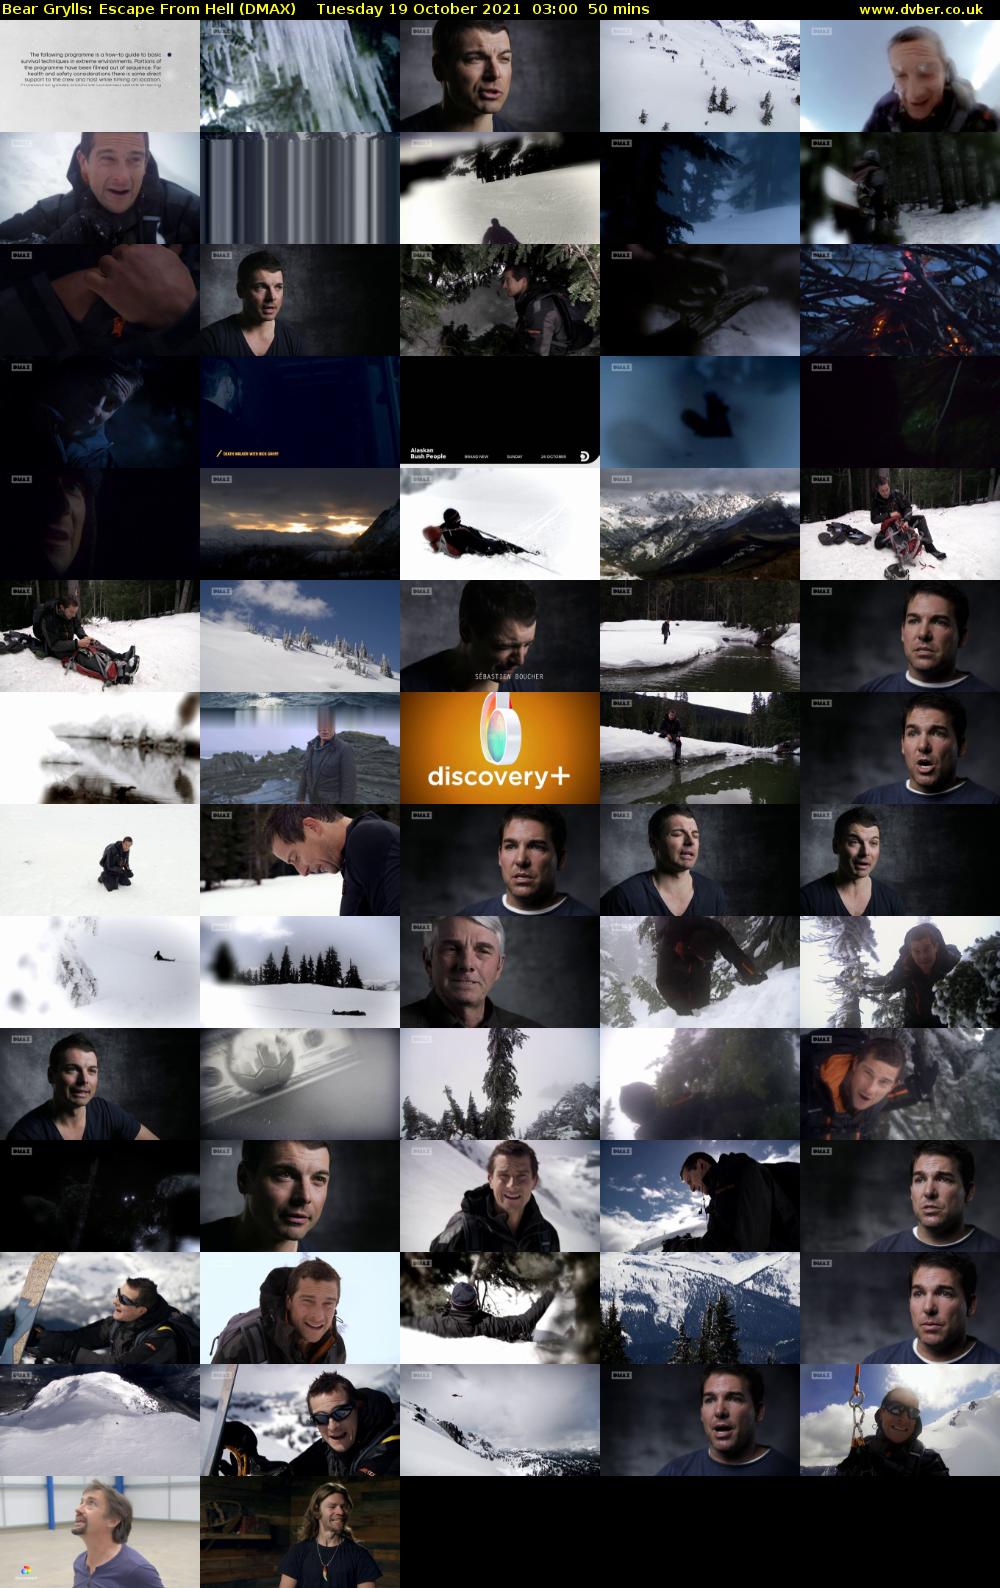 Bear Grylls: Escape From Hell (DMAX) Tuesday 19 October 2021 03:00 - 03:50